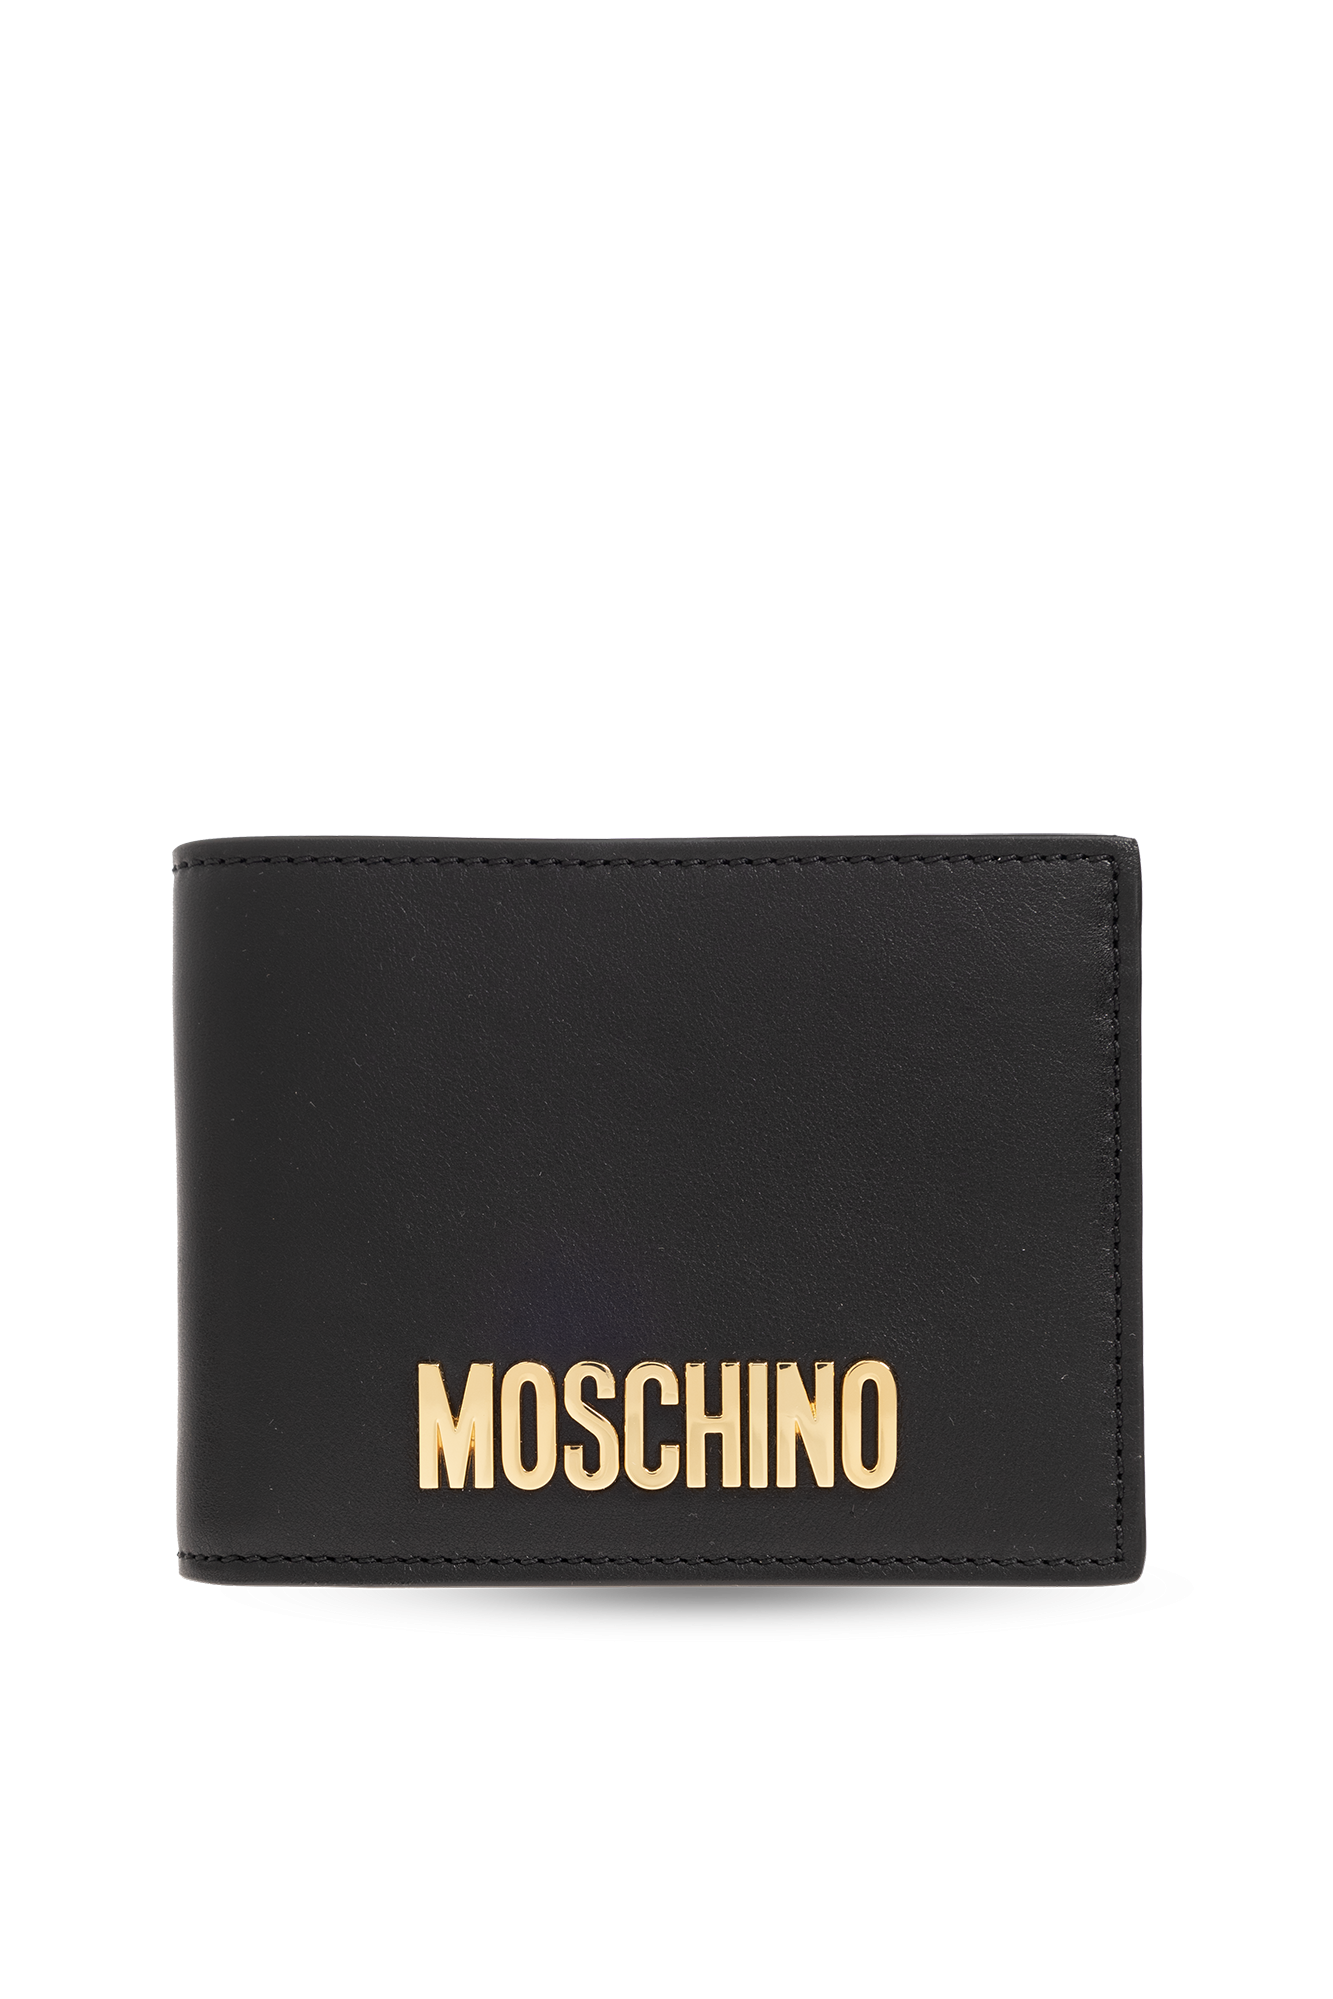 Black Leather wallet with logo Moschino - Vitkac Italy